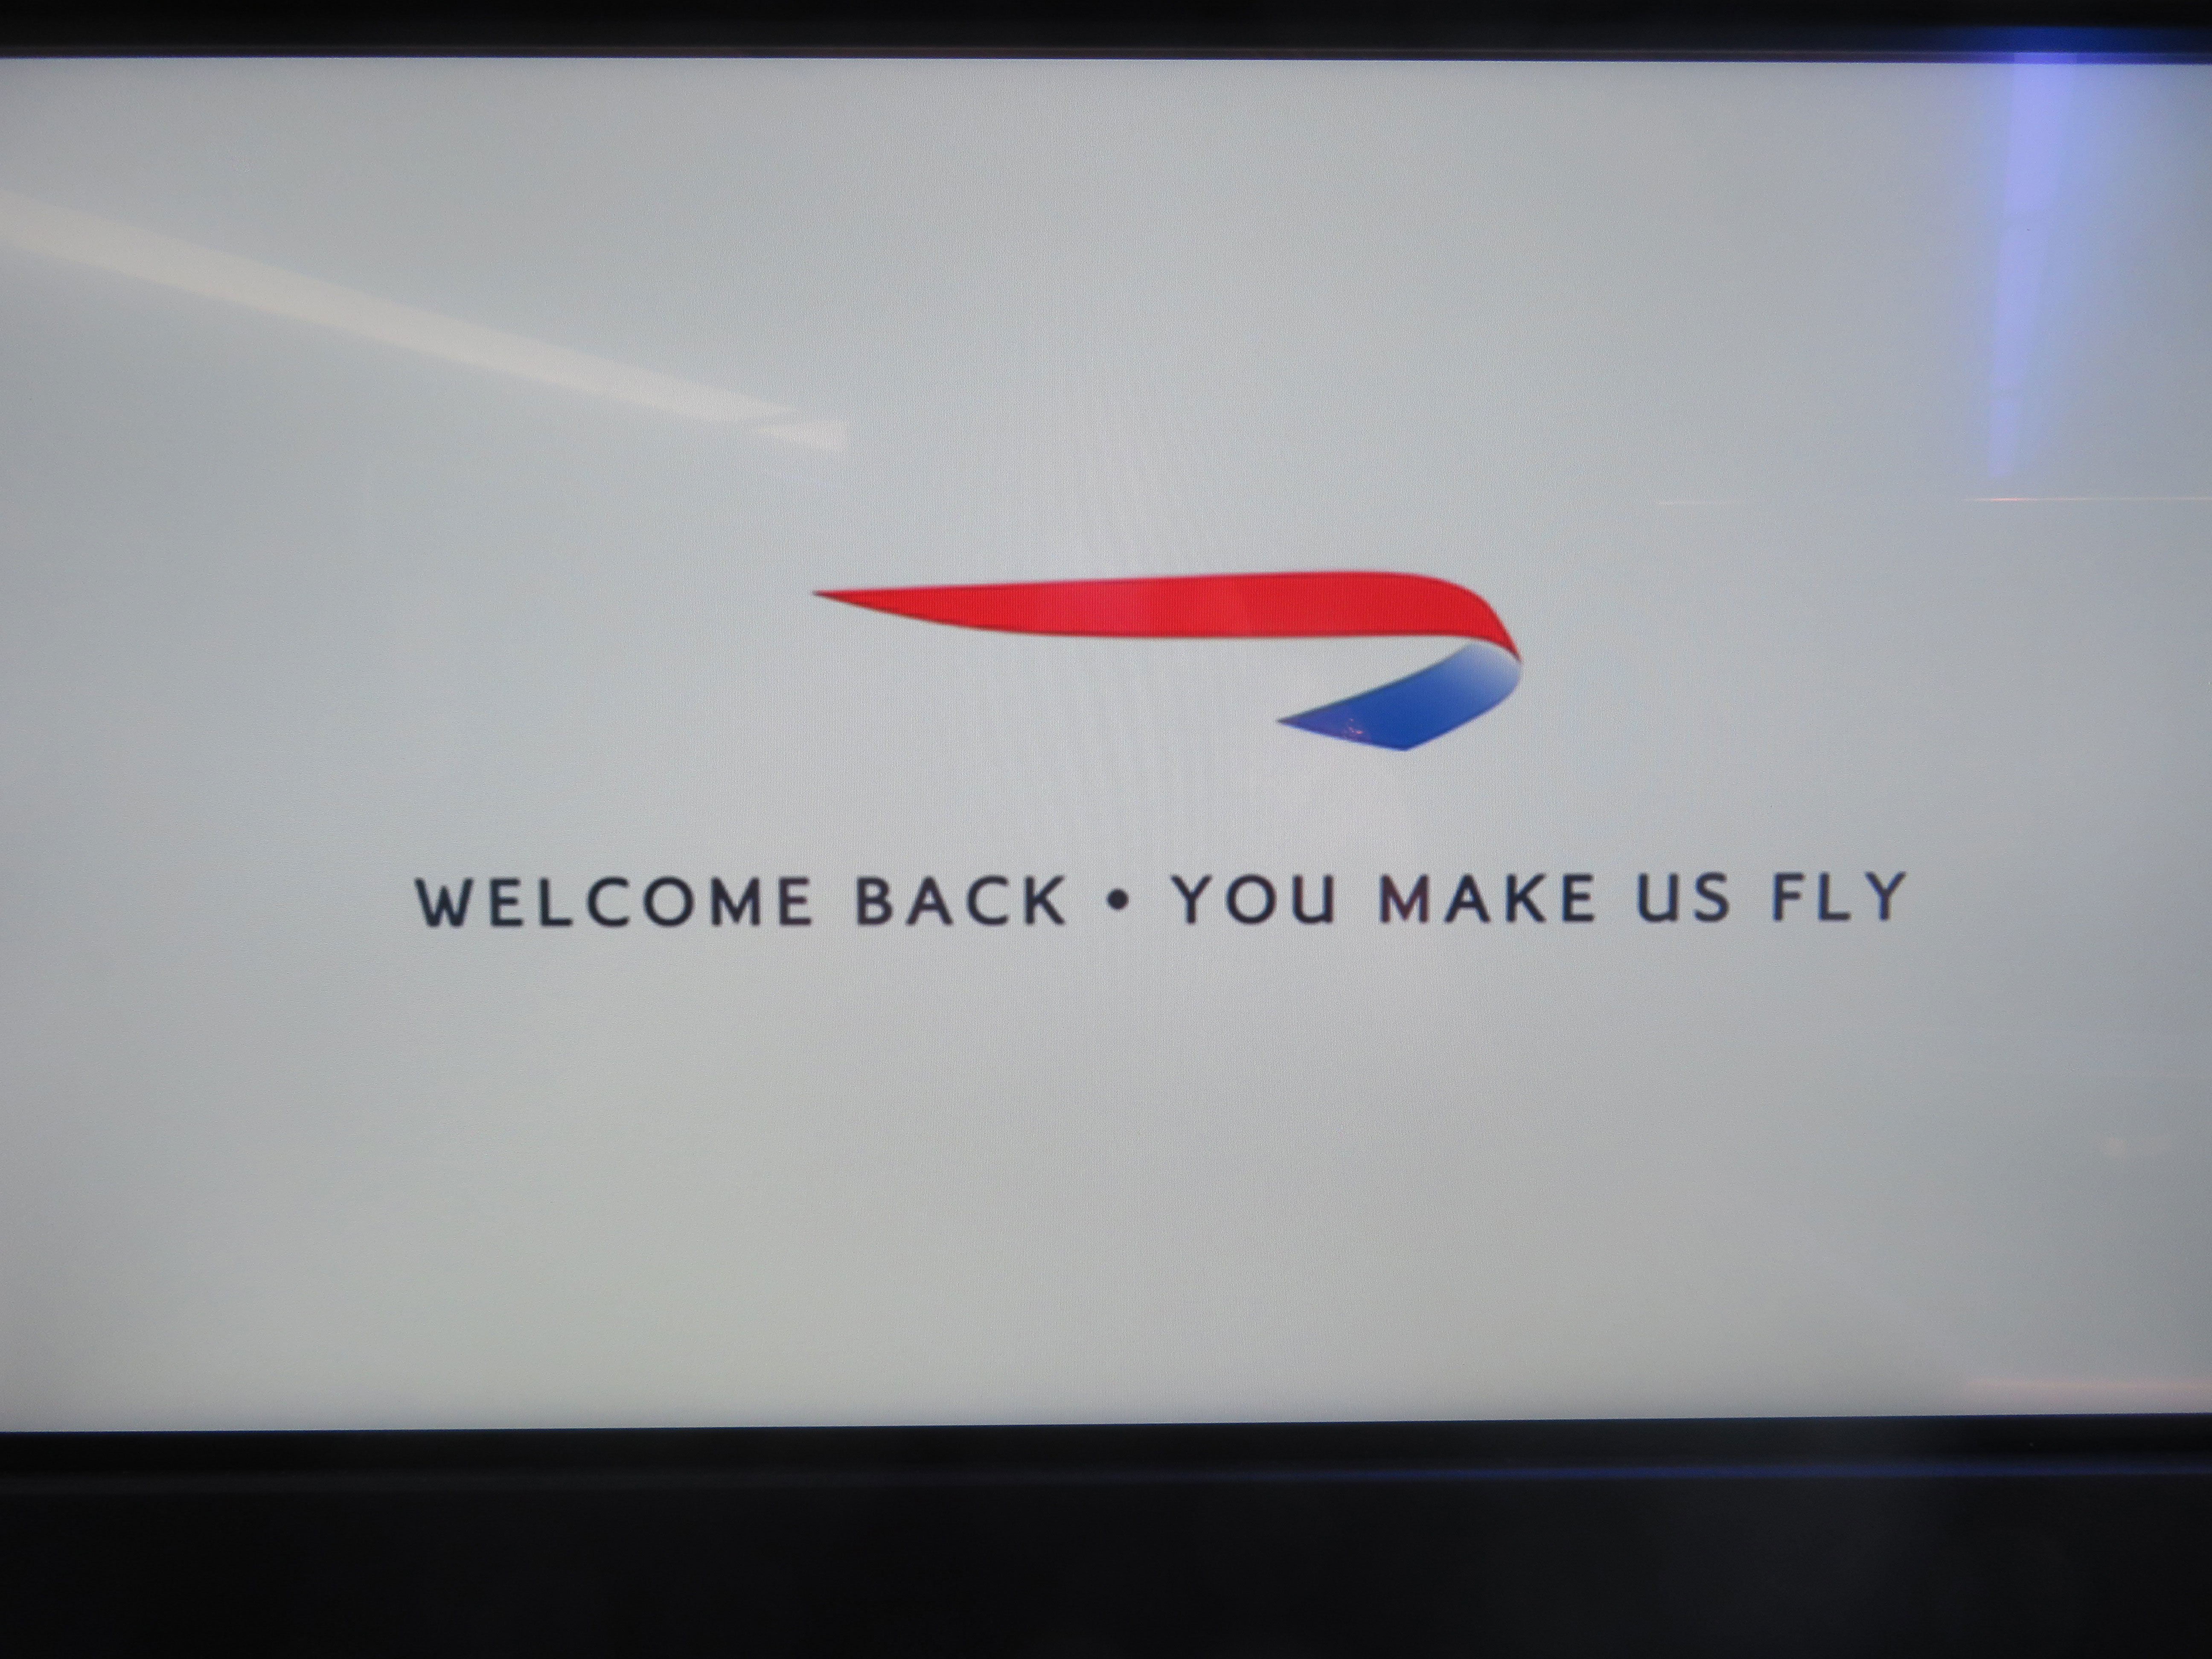 Welcome back. You make us fly.